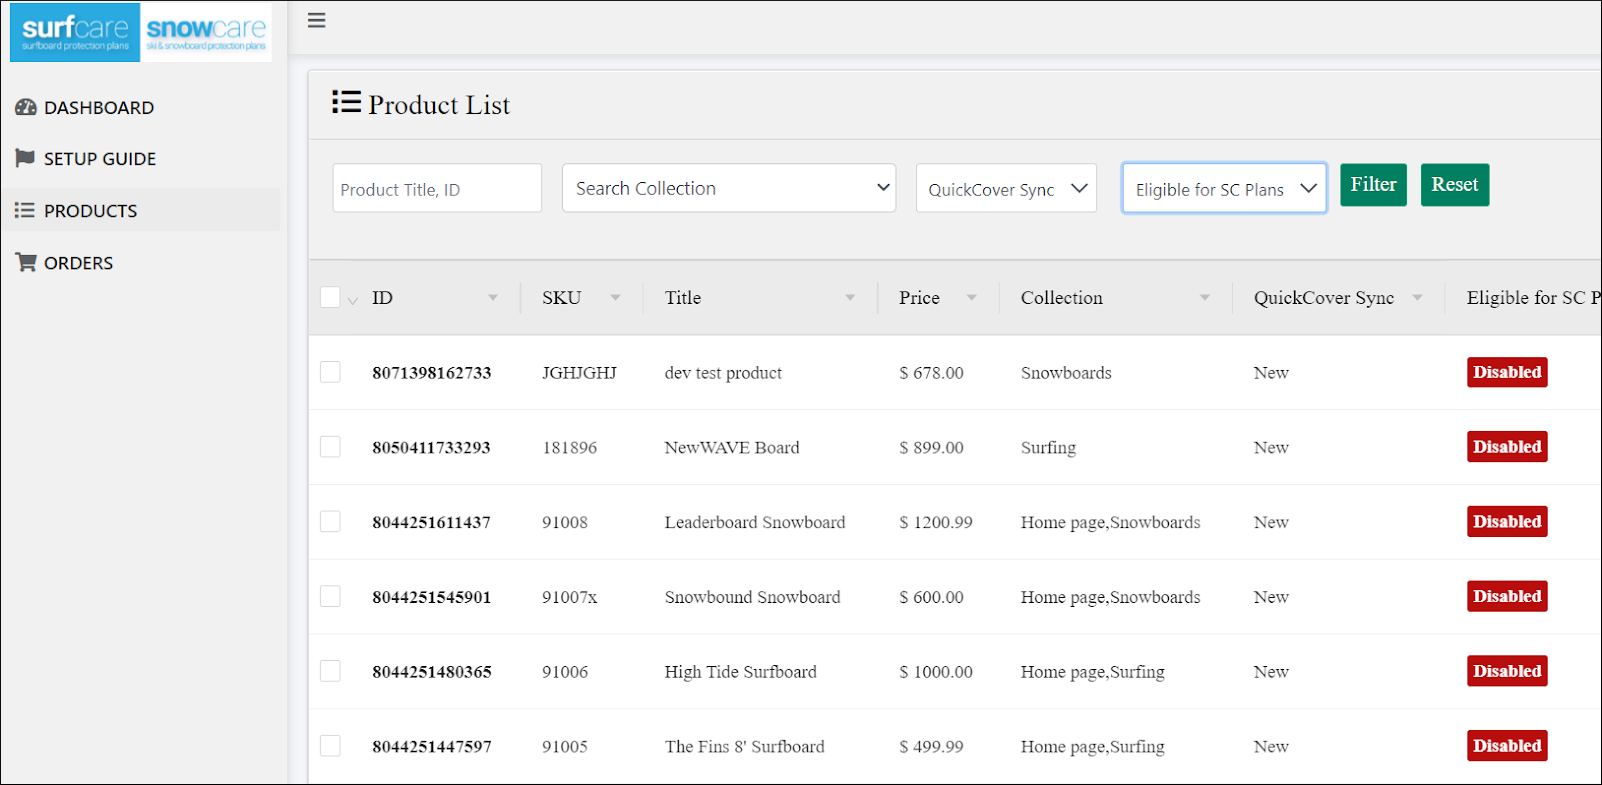 Screen capture of the Product List page